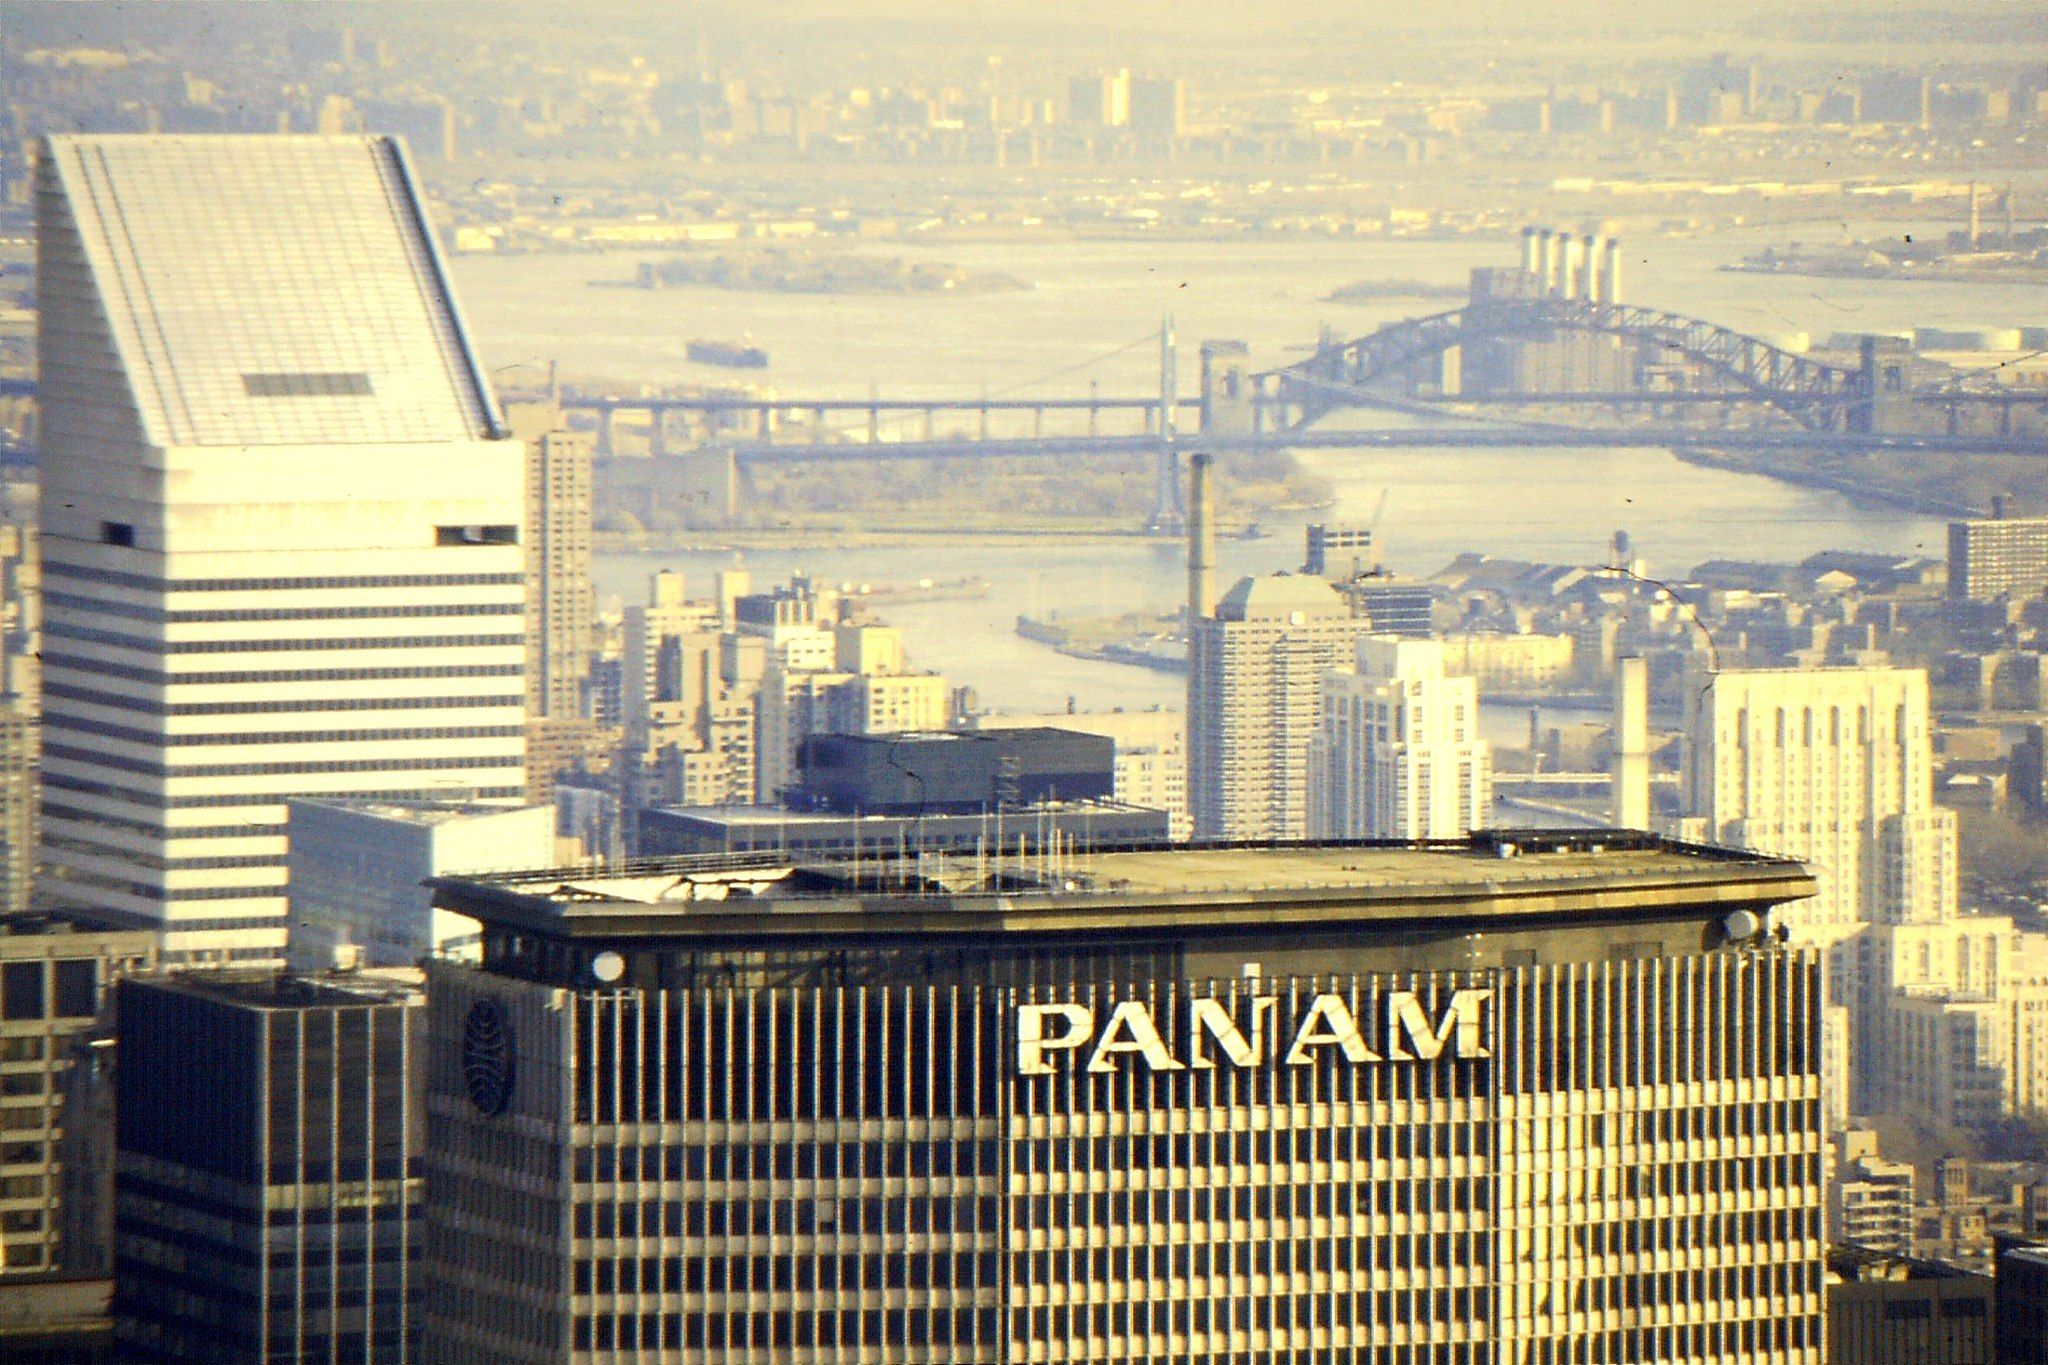 Top of the former Pan Am building in New York City